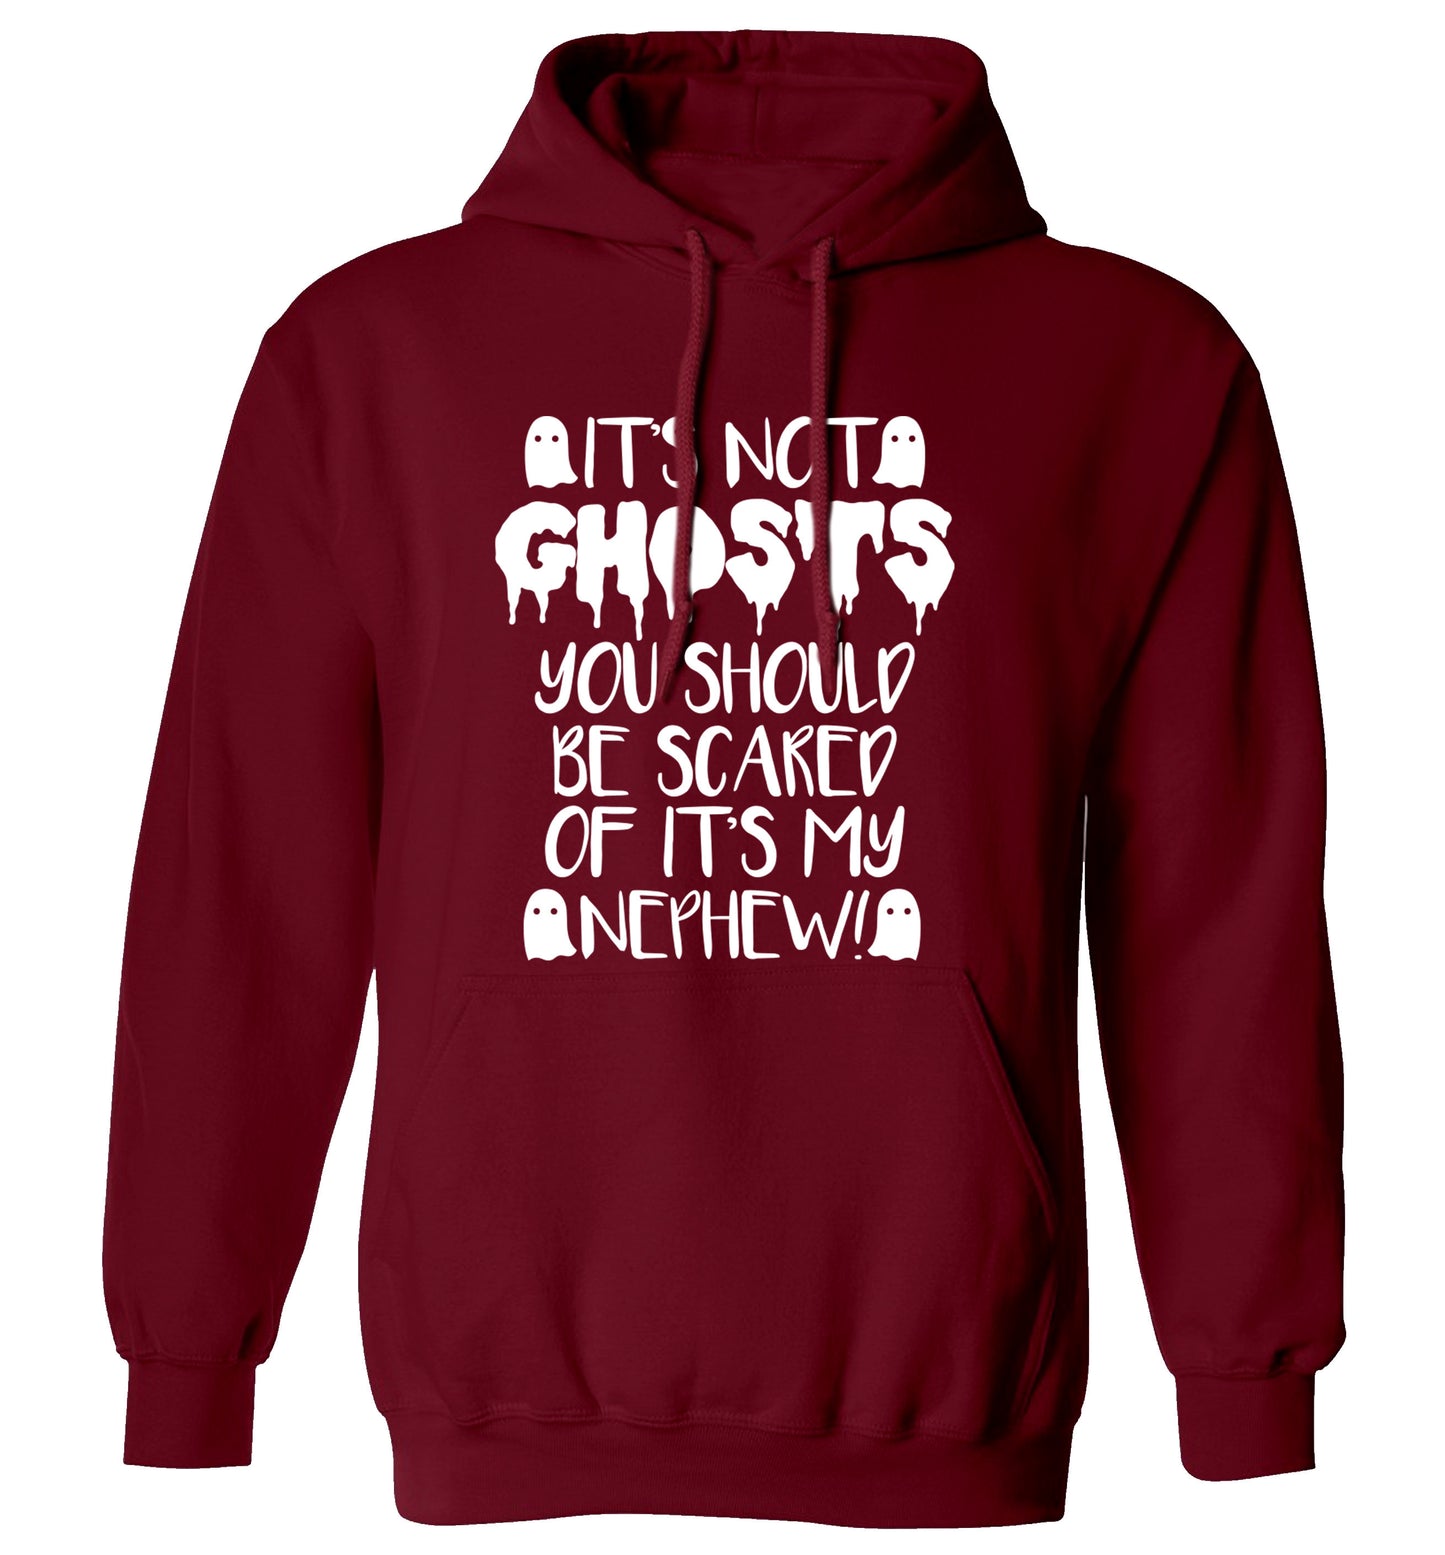 It's not ghosts you should be scared of it's my nephew! adults unisex maroon hoodie 2XL